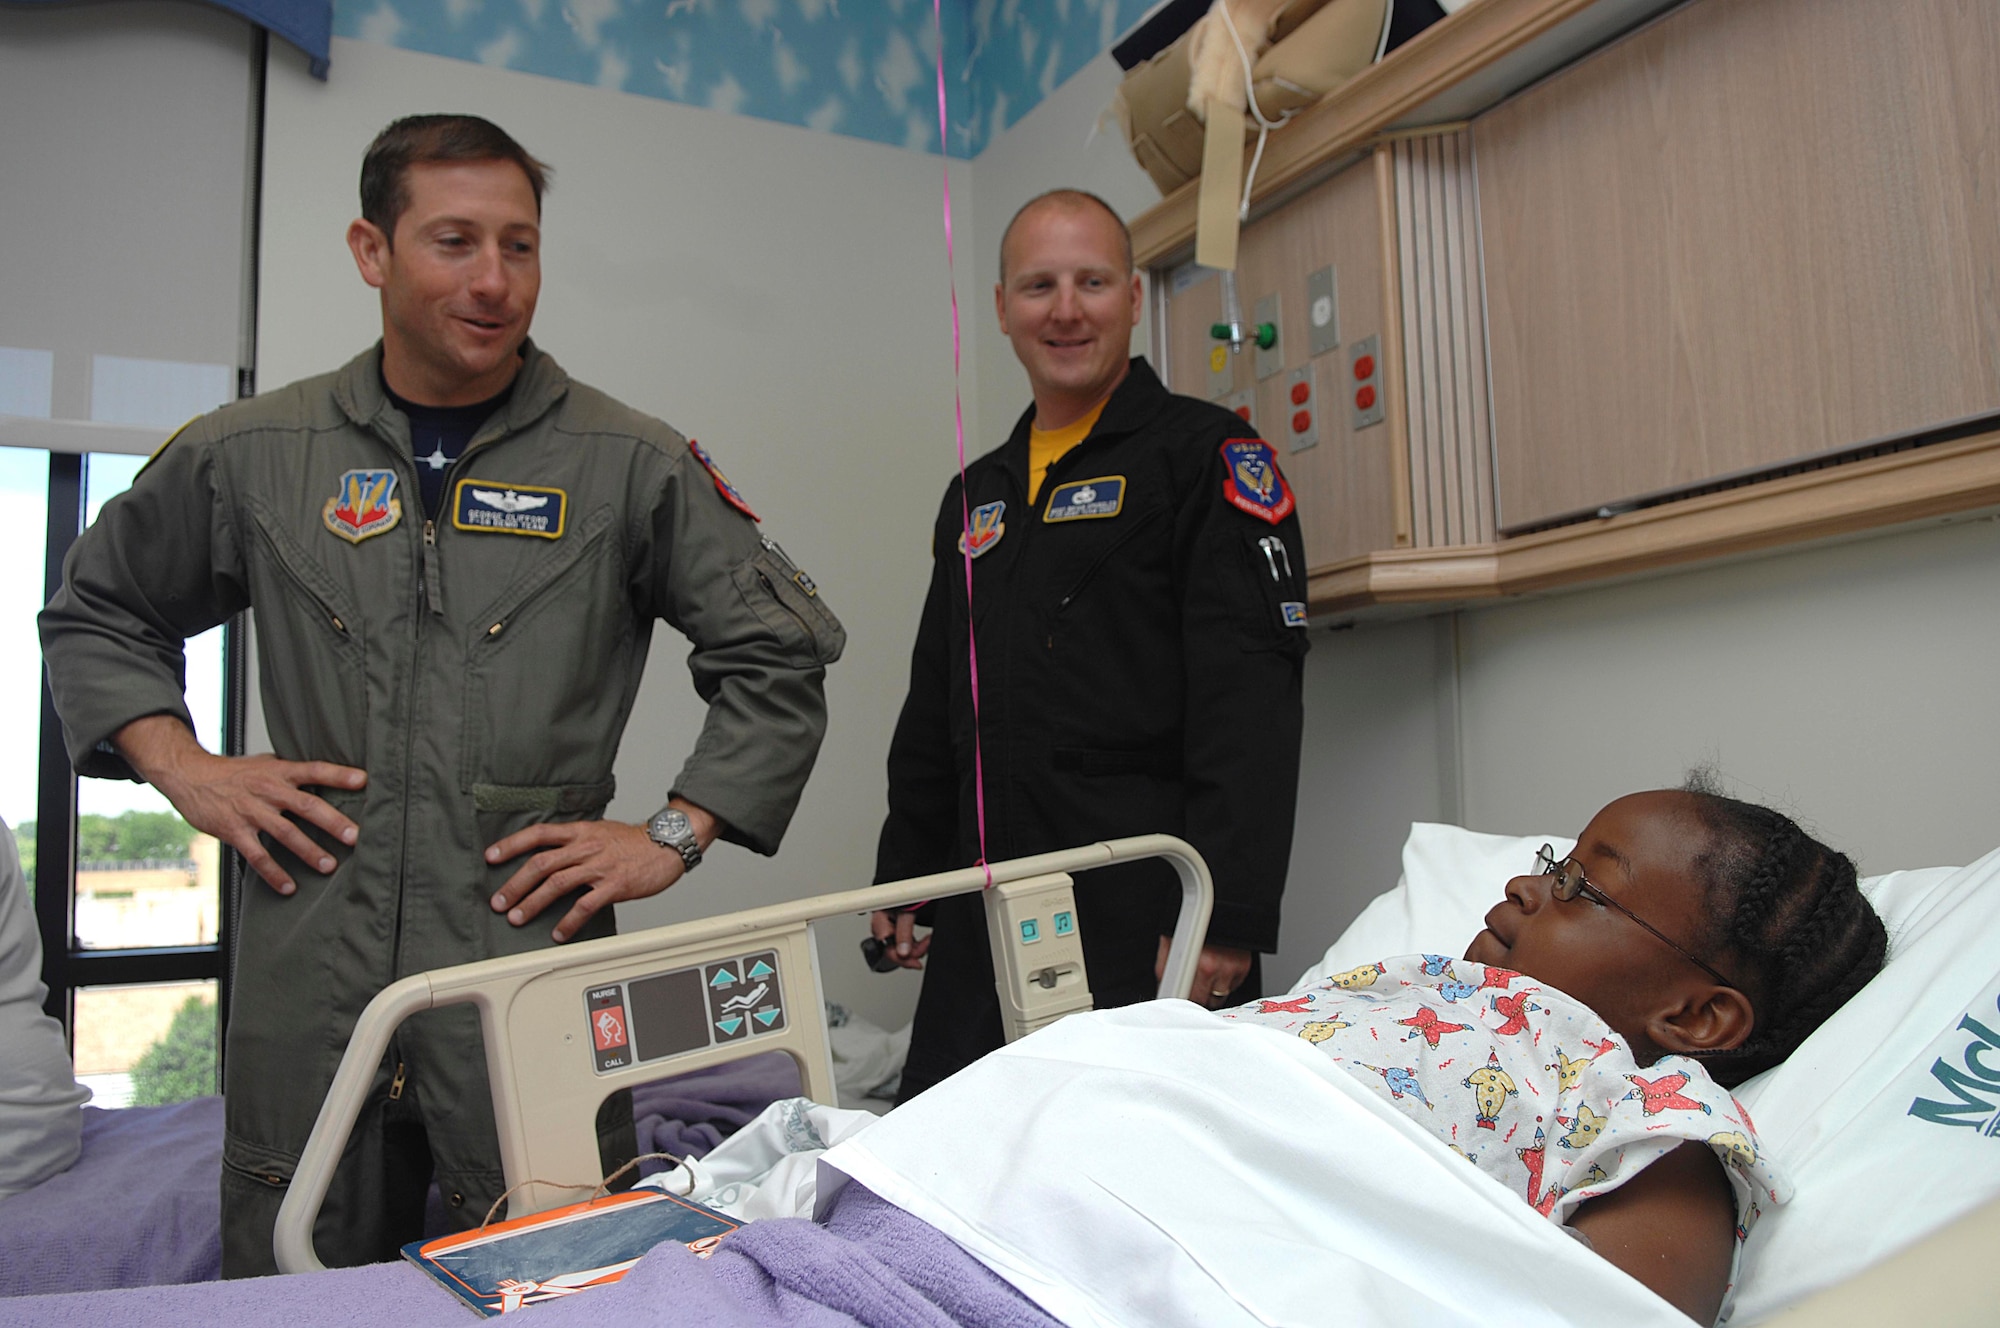 FLORENCE, S.C.-- Capt. George Clifford, pilot, and Master Sgt. Bryan Spangler, team chief, both members of the F-16 Viper East Demonstration Team, wish a quick recovery and talk about the Florence air show, May Fly, to seven-year-old Malaysia Patterson, daughter of Brenda Patterson, at McLeod Regional Medical Center May 22. The 20th Fighter Wing at Shaw Air Force Base, S.C., is home to the Viper East Demonstration Team, one of two single-ship F-16 aerial demonstration teams in Air Combat Command. The 338th FW at Hill AFB, Utah, is home to the Viper West Coast Demonstration Team. (U.S. Air Force photo/Staff Sgt. Nathan Bevier)